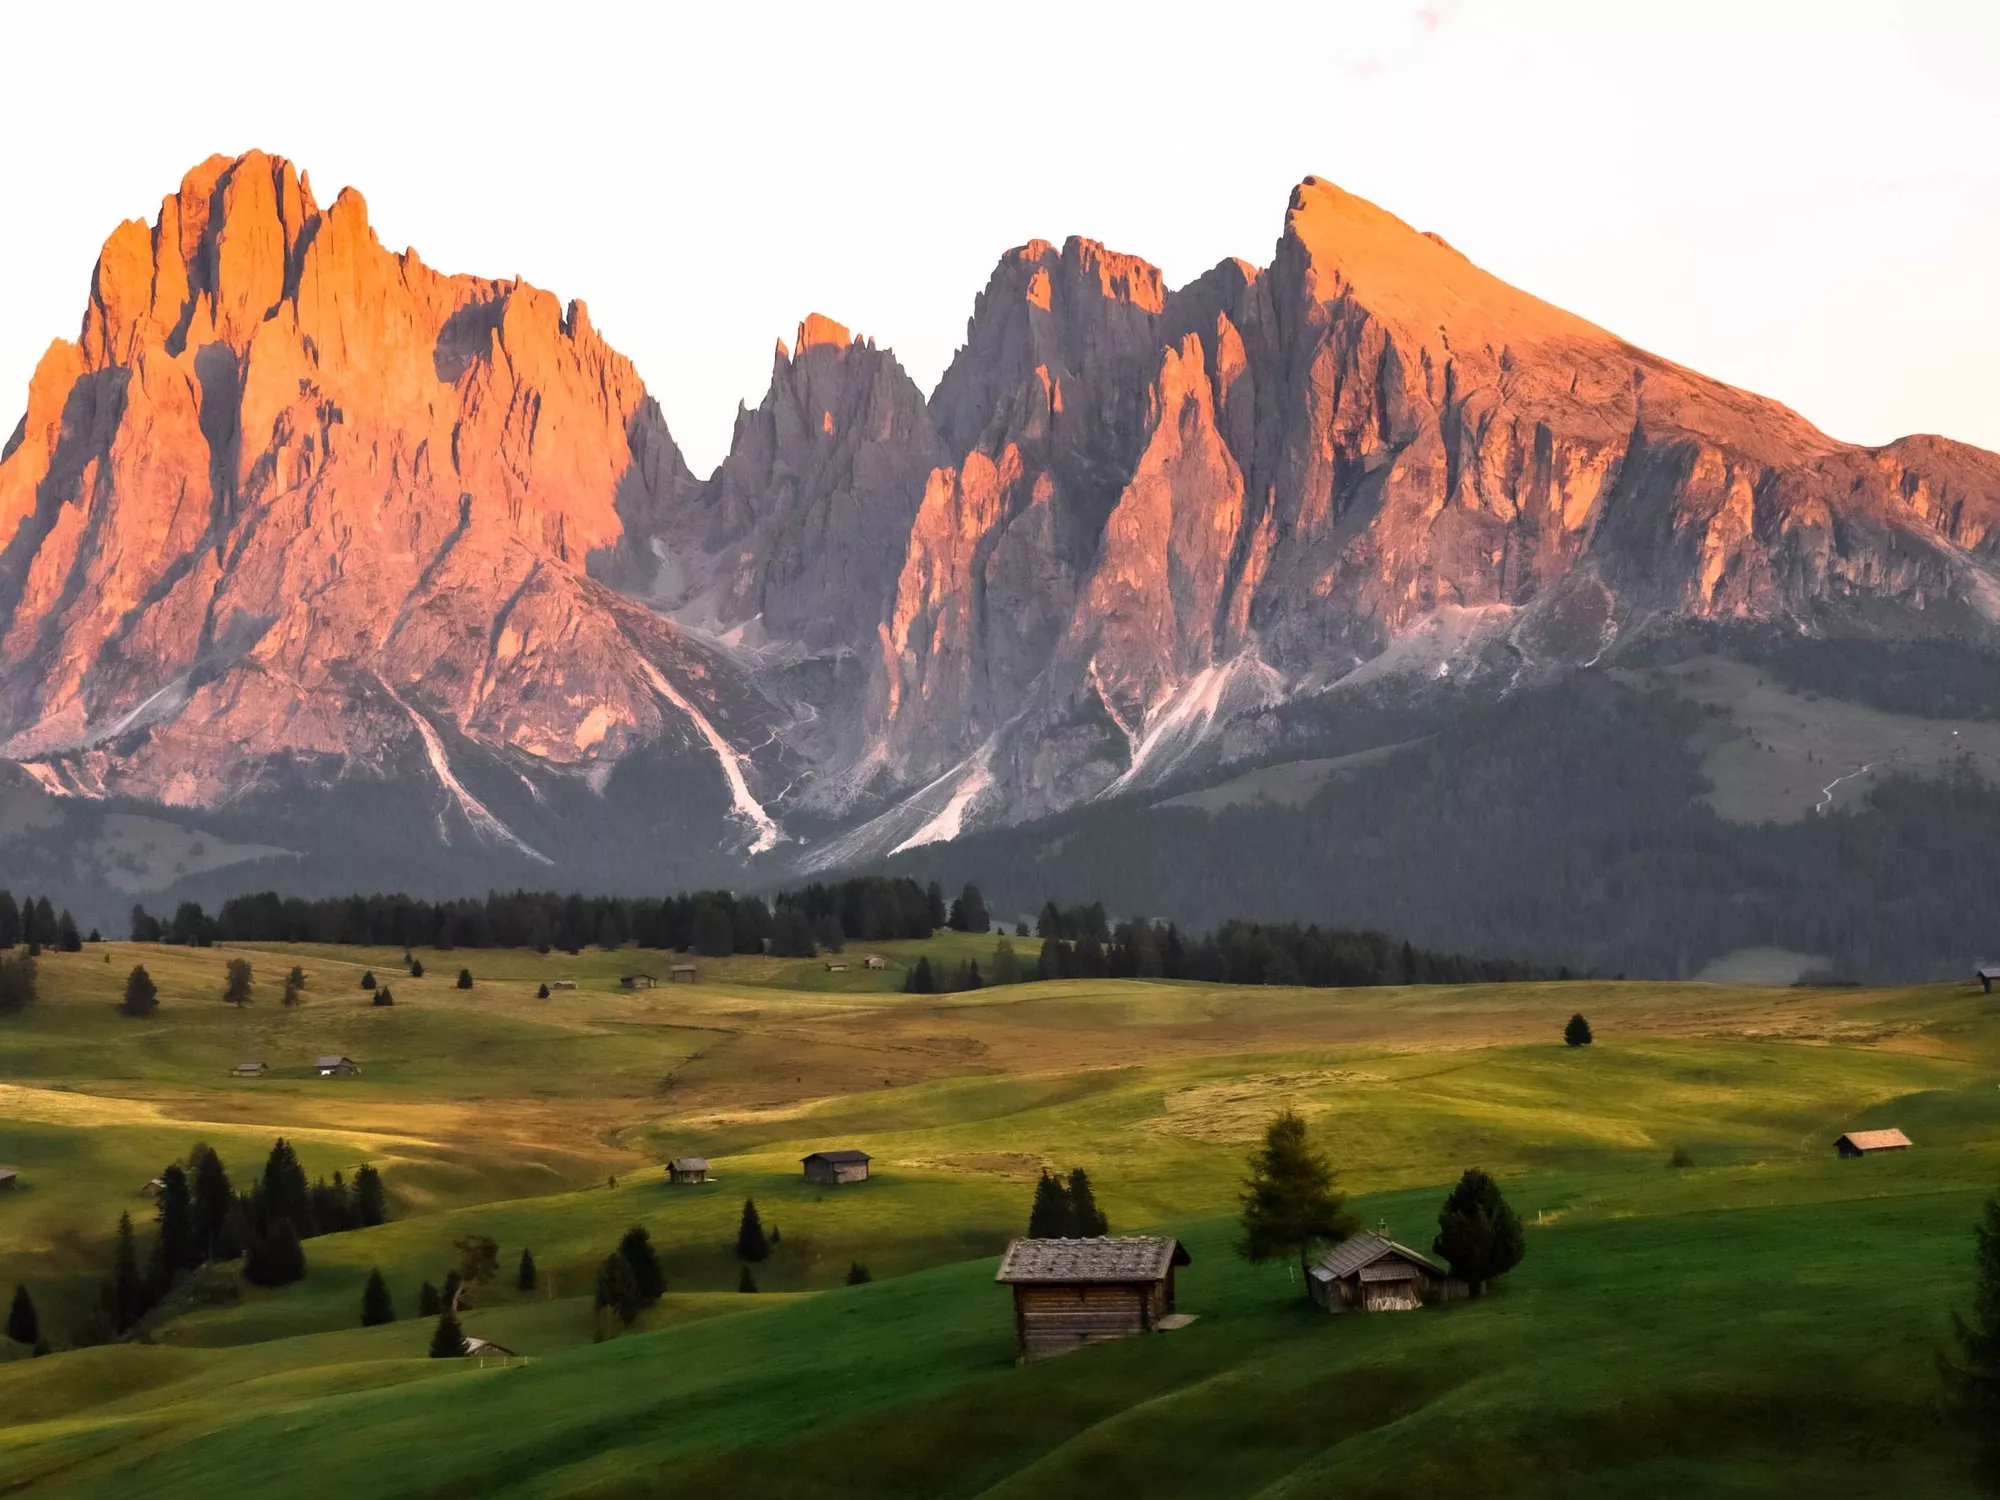 Green alpine meadows with wooden huts, the Dolomites in the background, at sunset (c) Tomas Malik / Unsplash